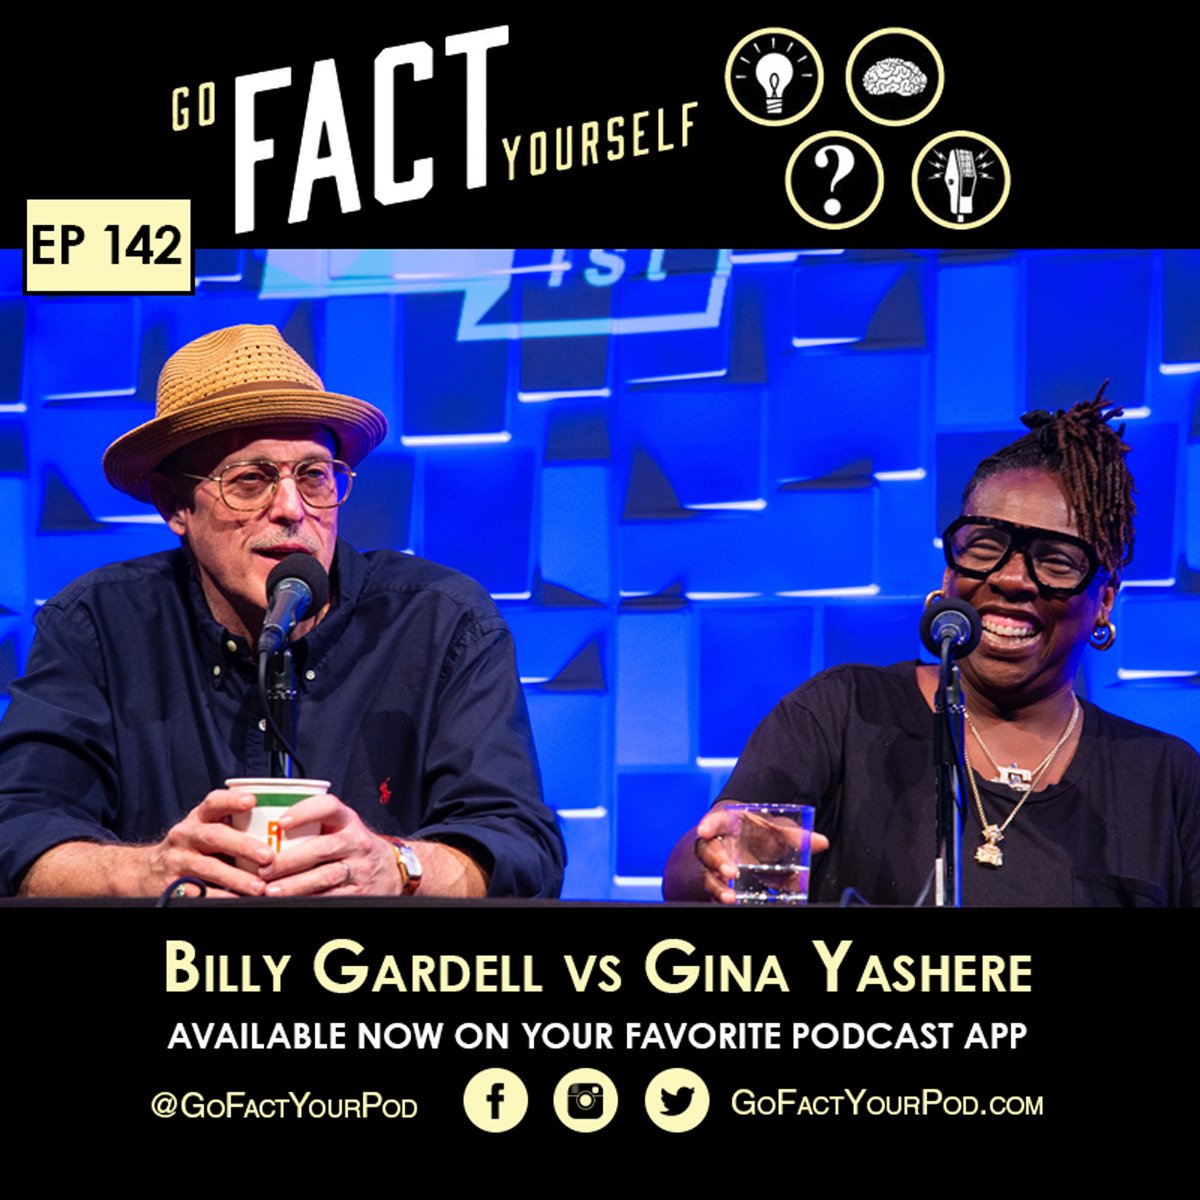 🔙 New Episode Alert! 🏗️ Billy Gardell vs Gina Yashere! Surprise Experts! Host: @j_keith & @funnyhelenhong Recorded LIVE with @laistofficial Listen NOW at bit.ly/GFY142 or wherever you get podcasts! @BillyGardell @ginayashere @maxfunhq 📸:@ValadaPhoto